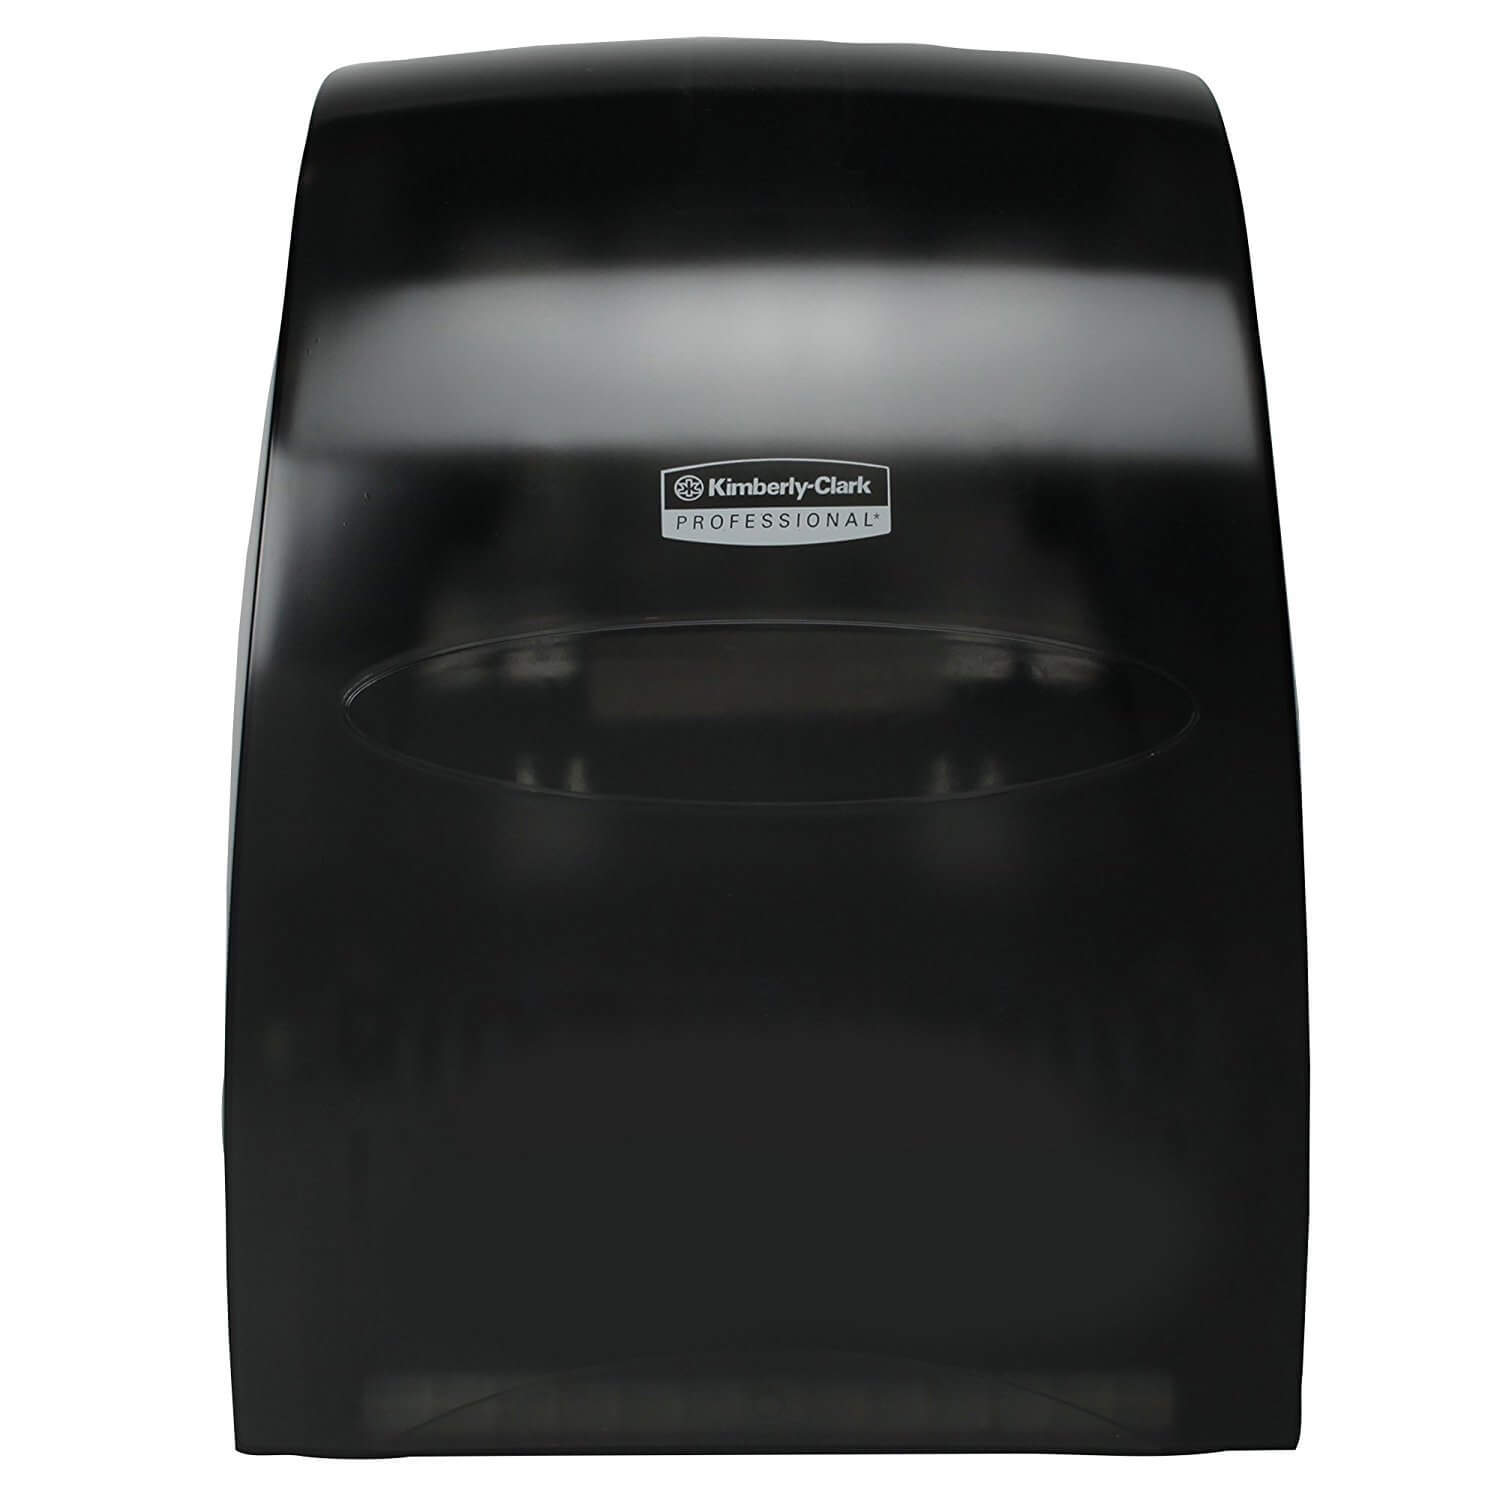 Kimberly-Clark Professional Sanitouch Hard Roll Paper Towel Dispenser